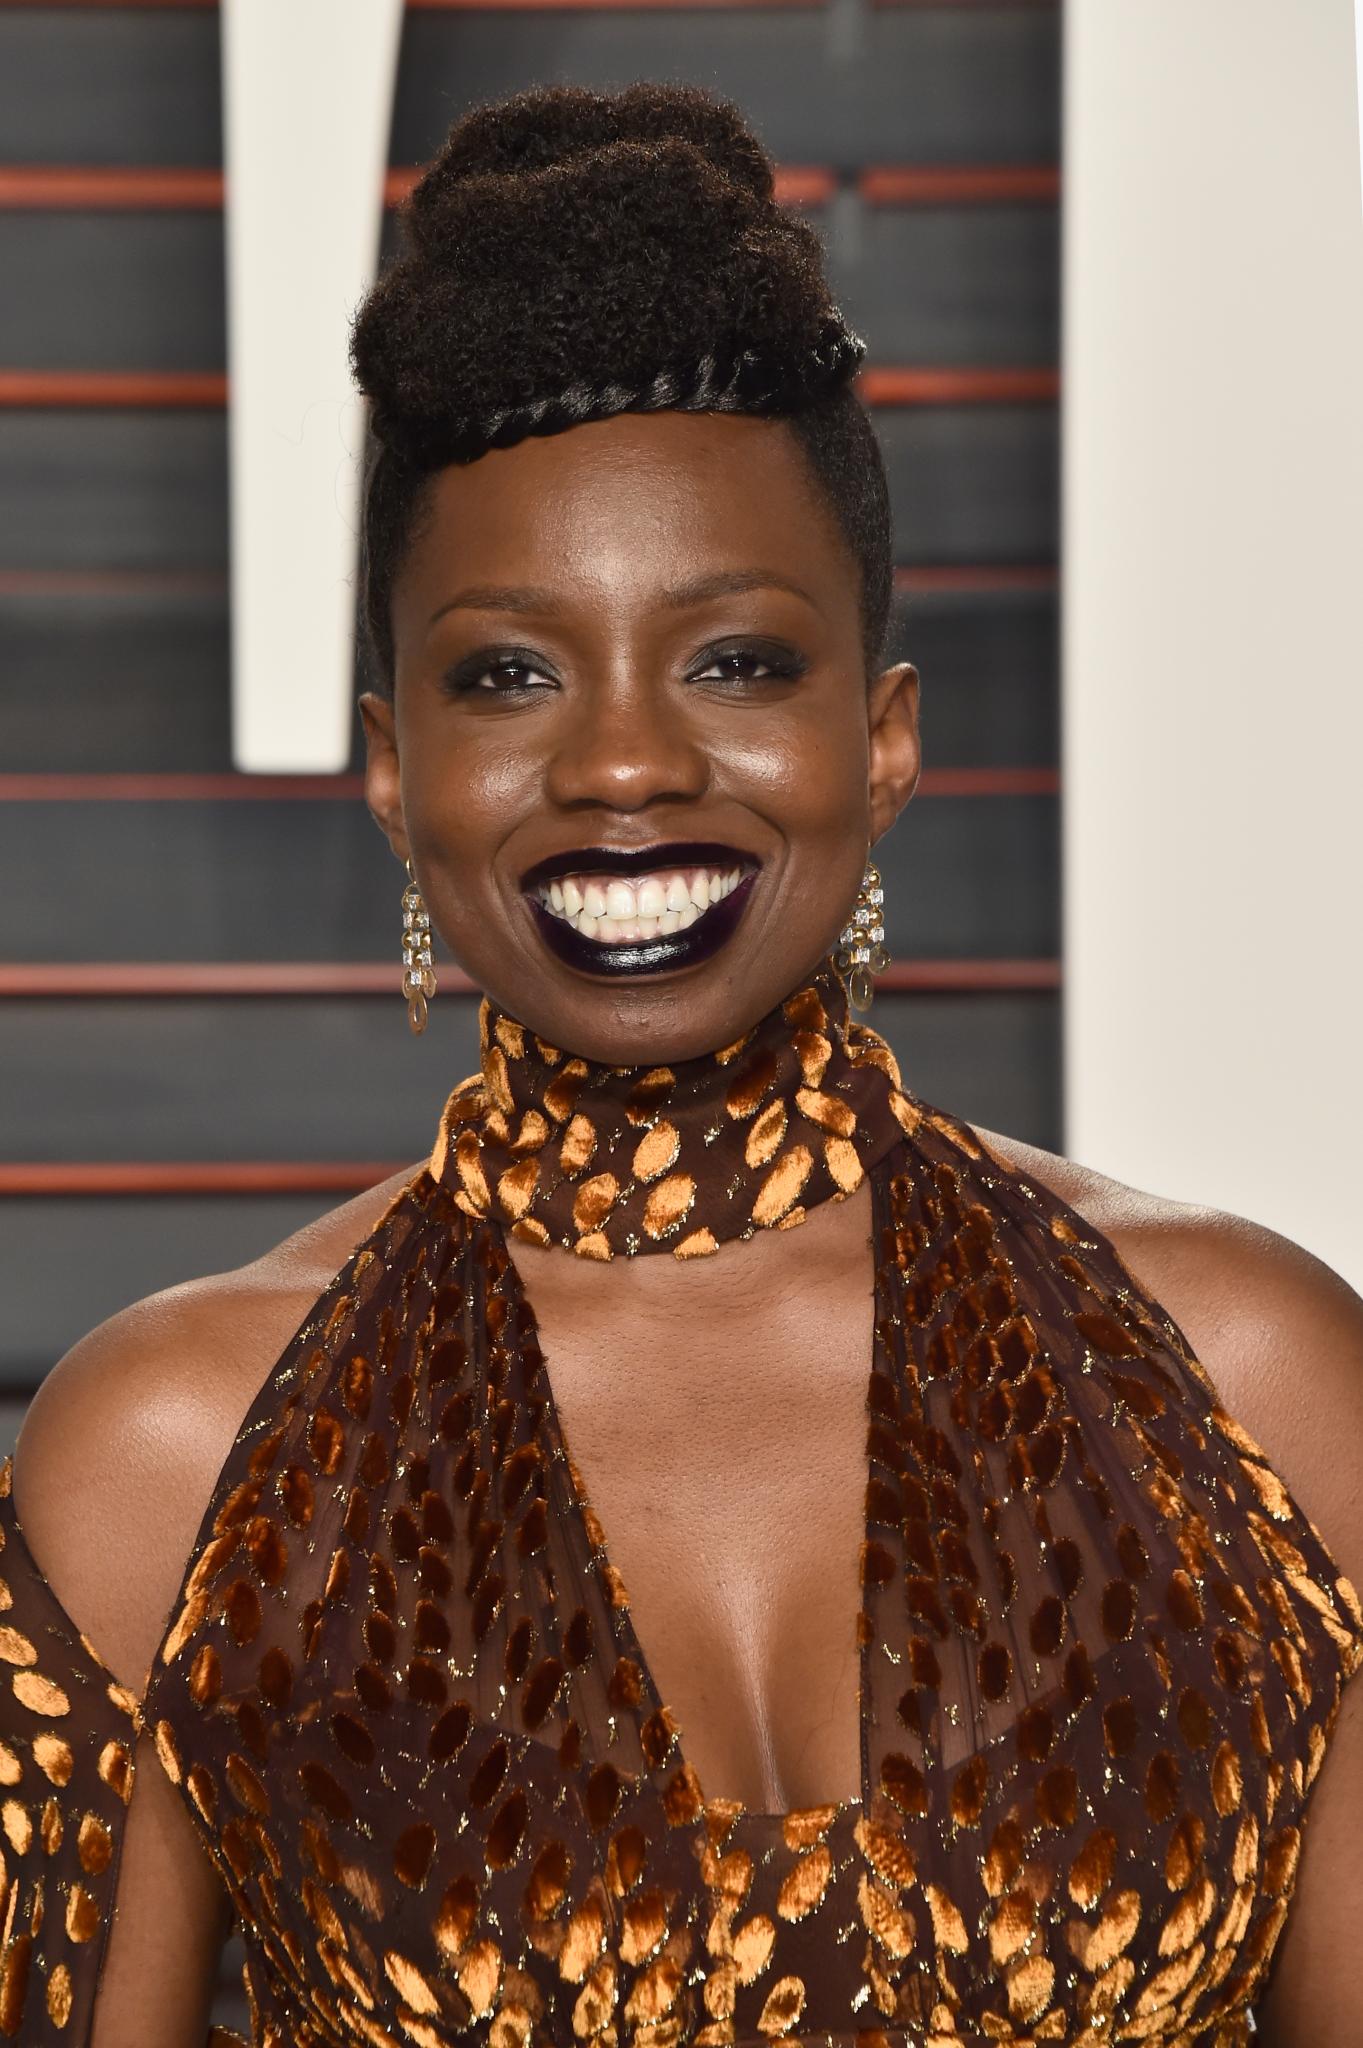 Get Adepero Oduye’s Intricately Twisted Crown From The Oscars